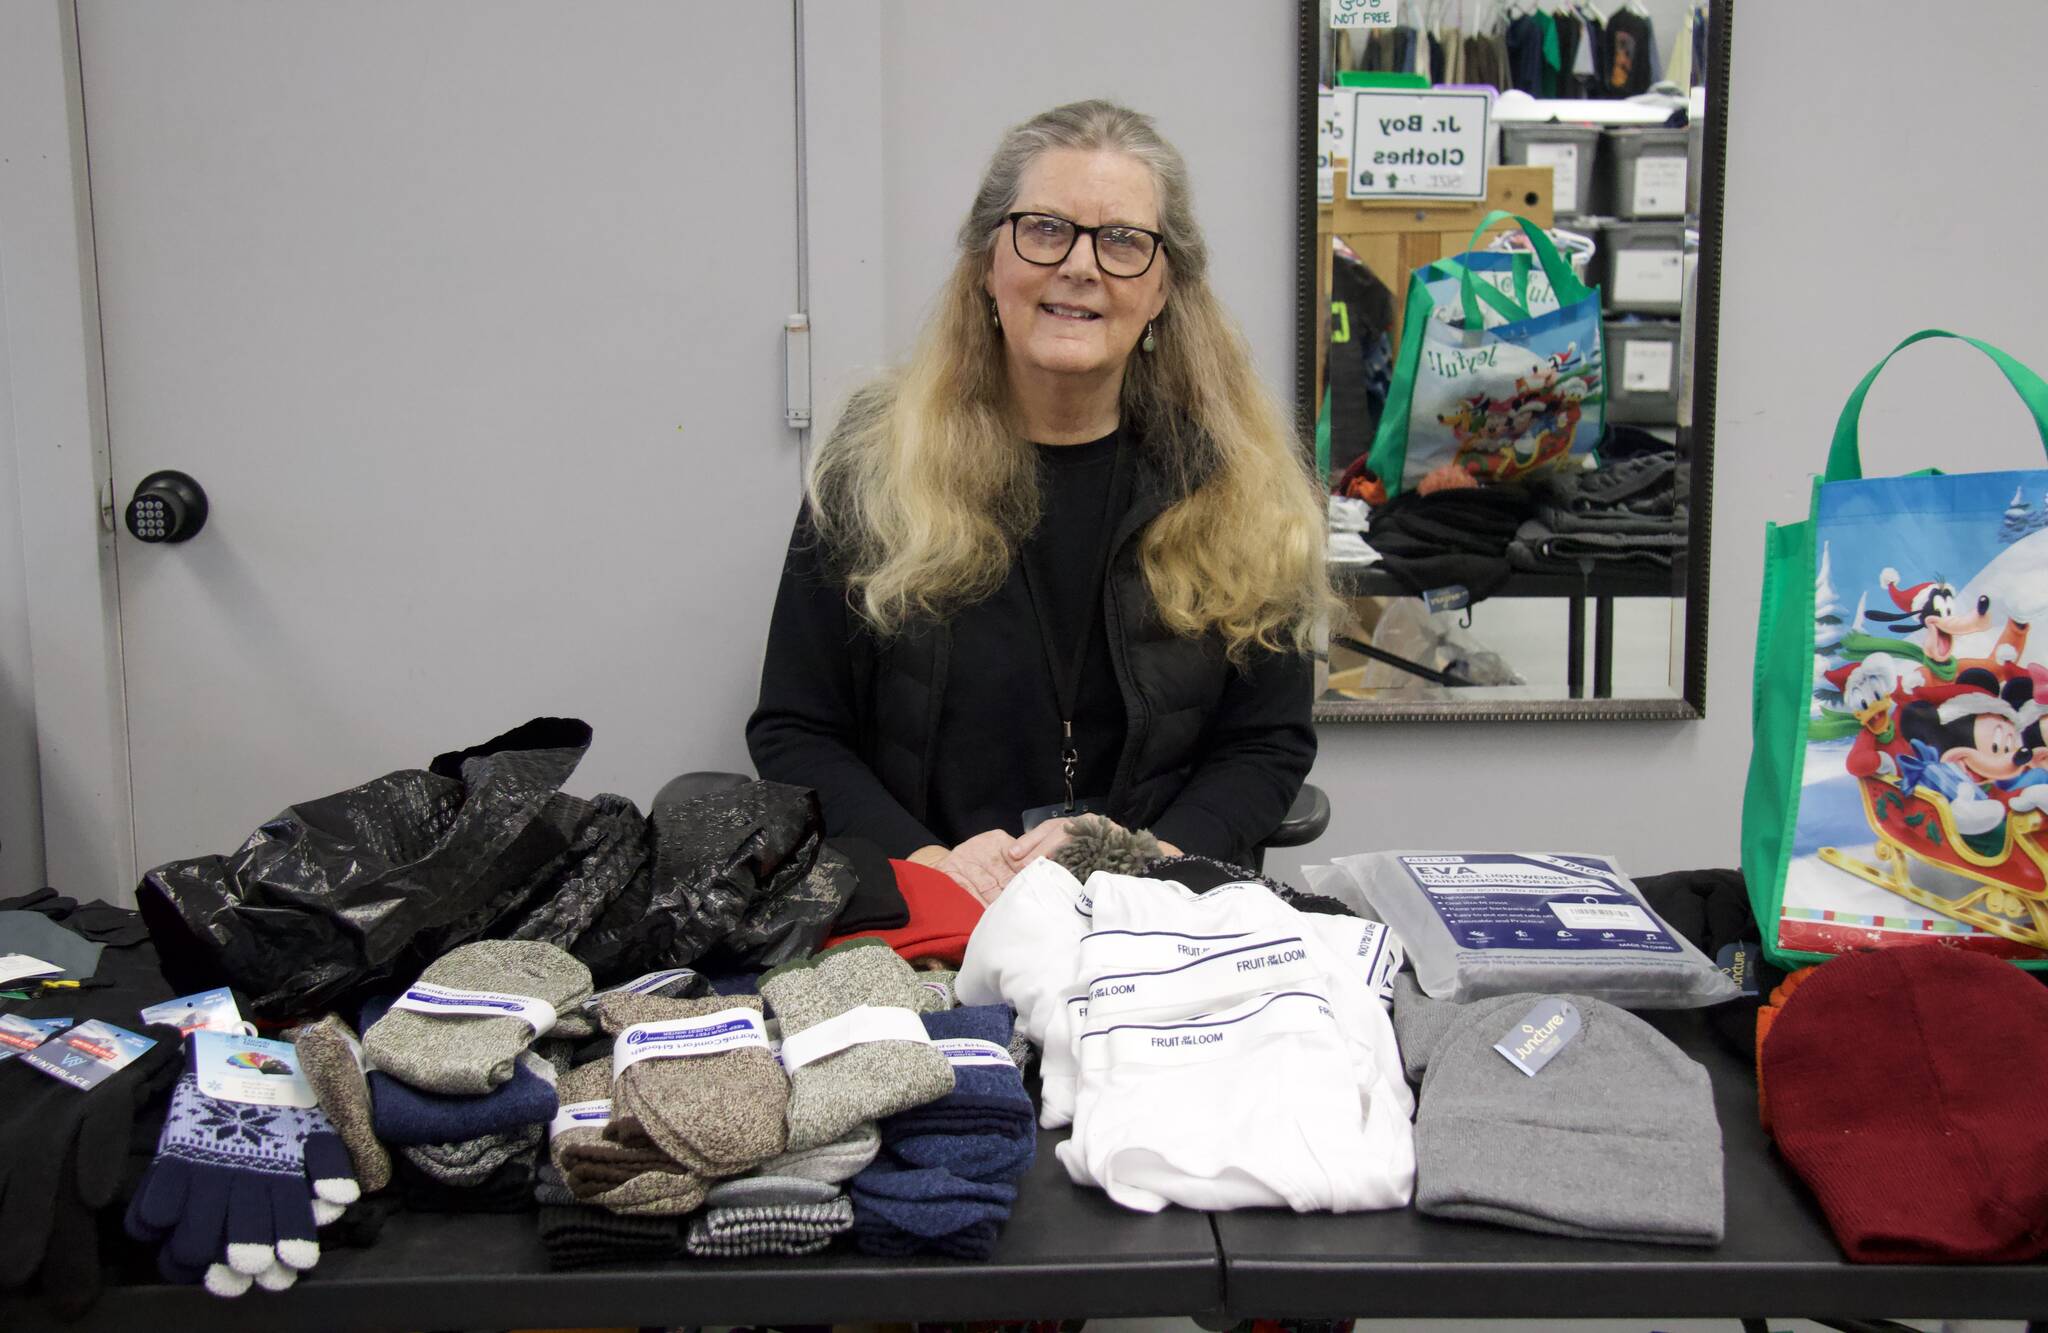 Photo by Rachel Rosen/Whidbey News-Times
Garage of Blessings volunteer Jane Brent organized one of the nonprofit’s holiday events this year. She handed out brand new scarves, hats, gloves and other clothing needed for winter.